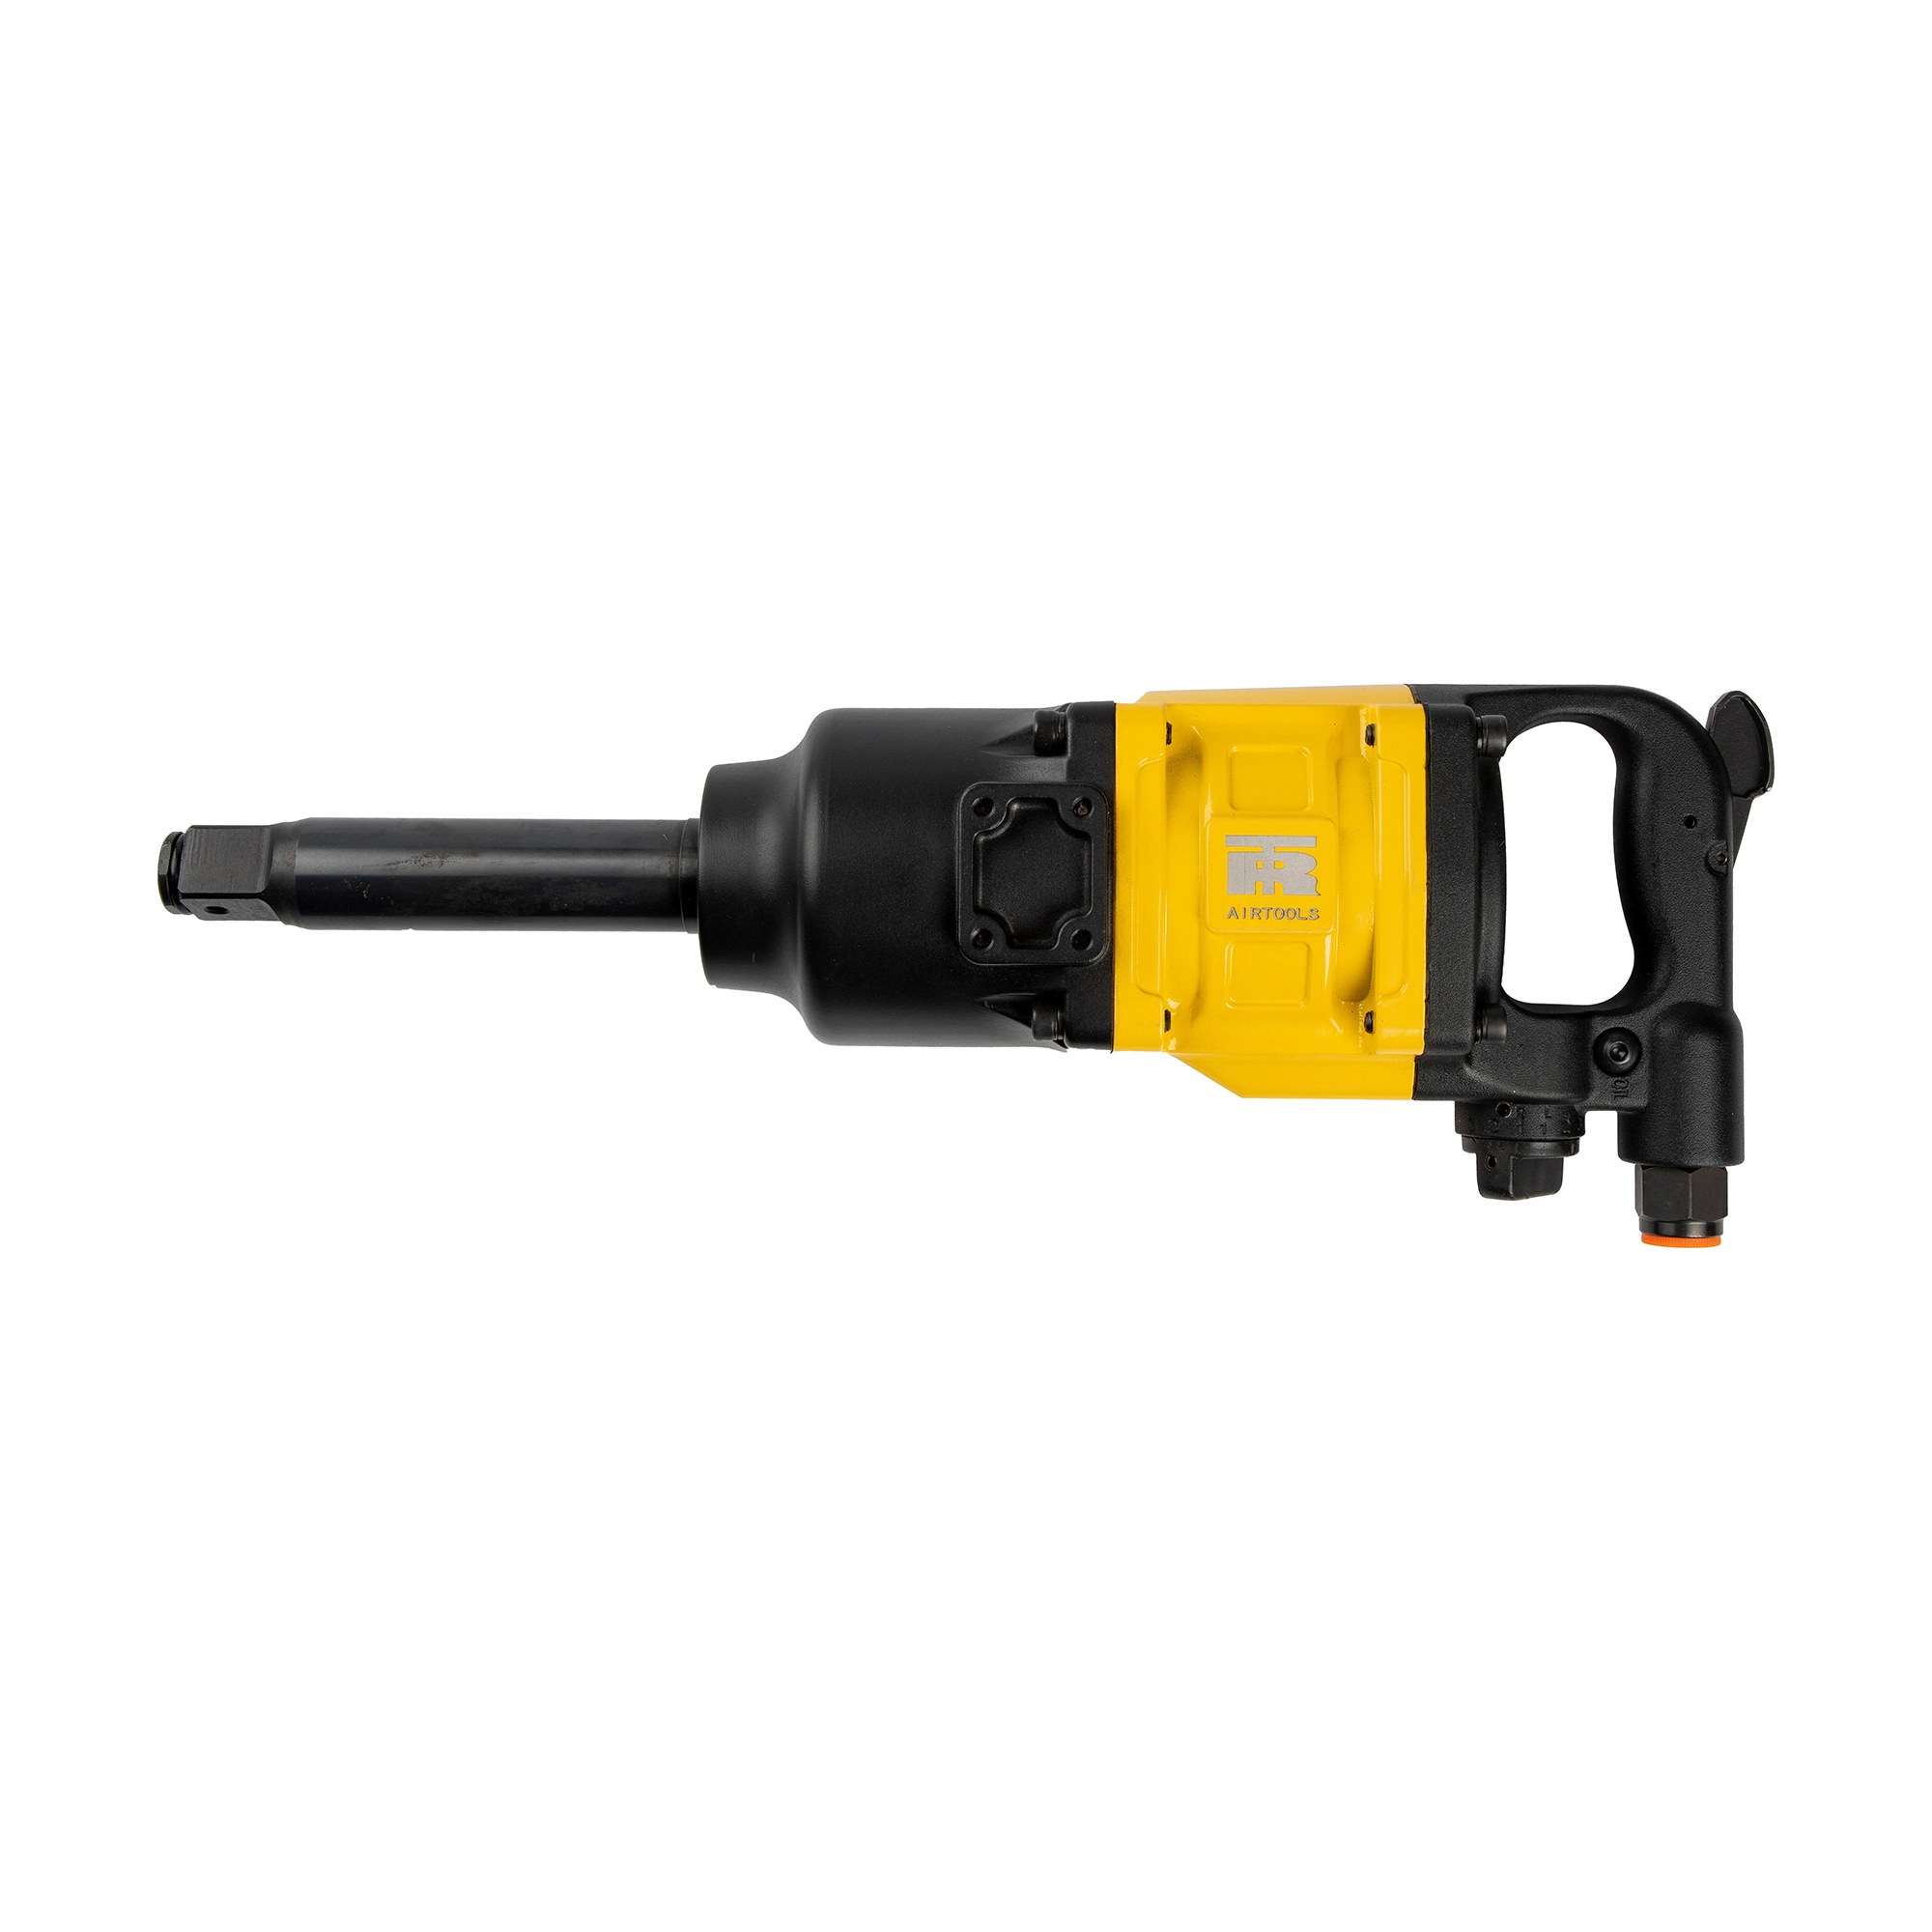 1 Inch Air Impact Wrench Pneumatic Tool